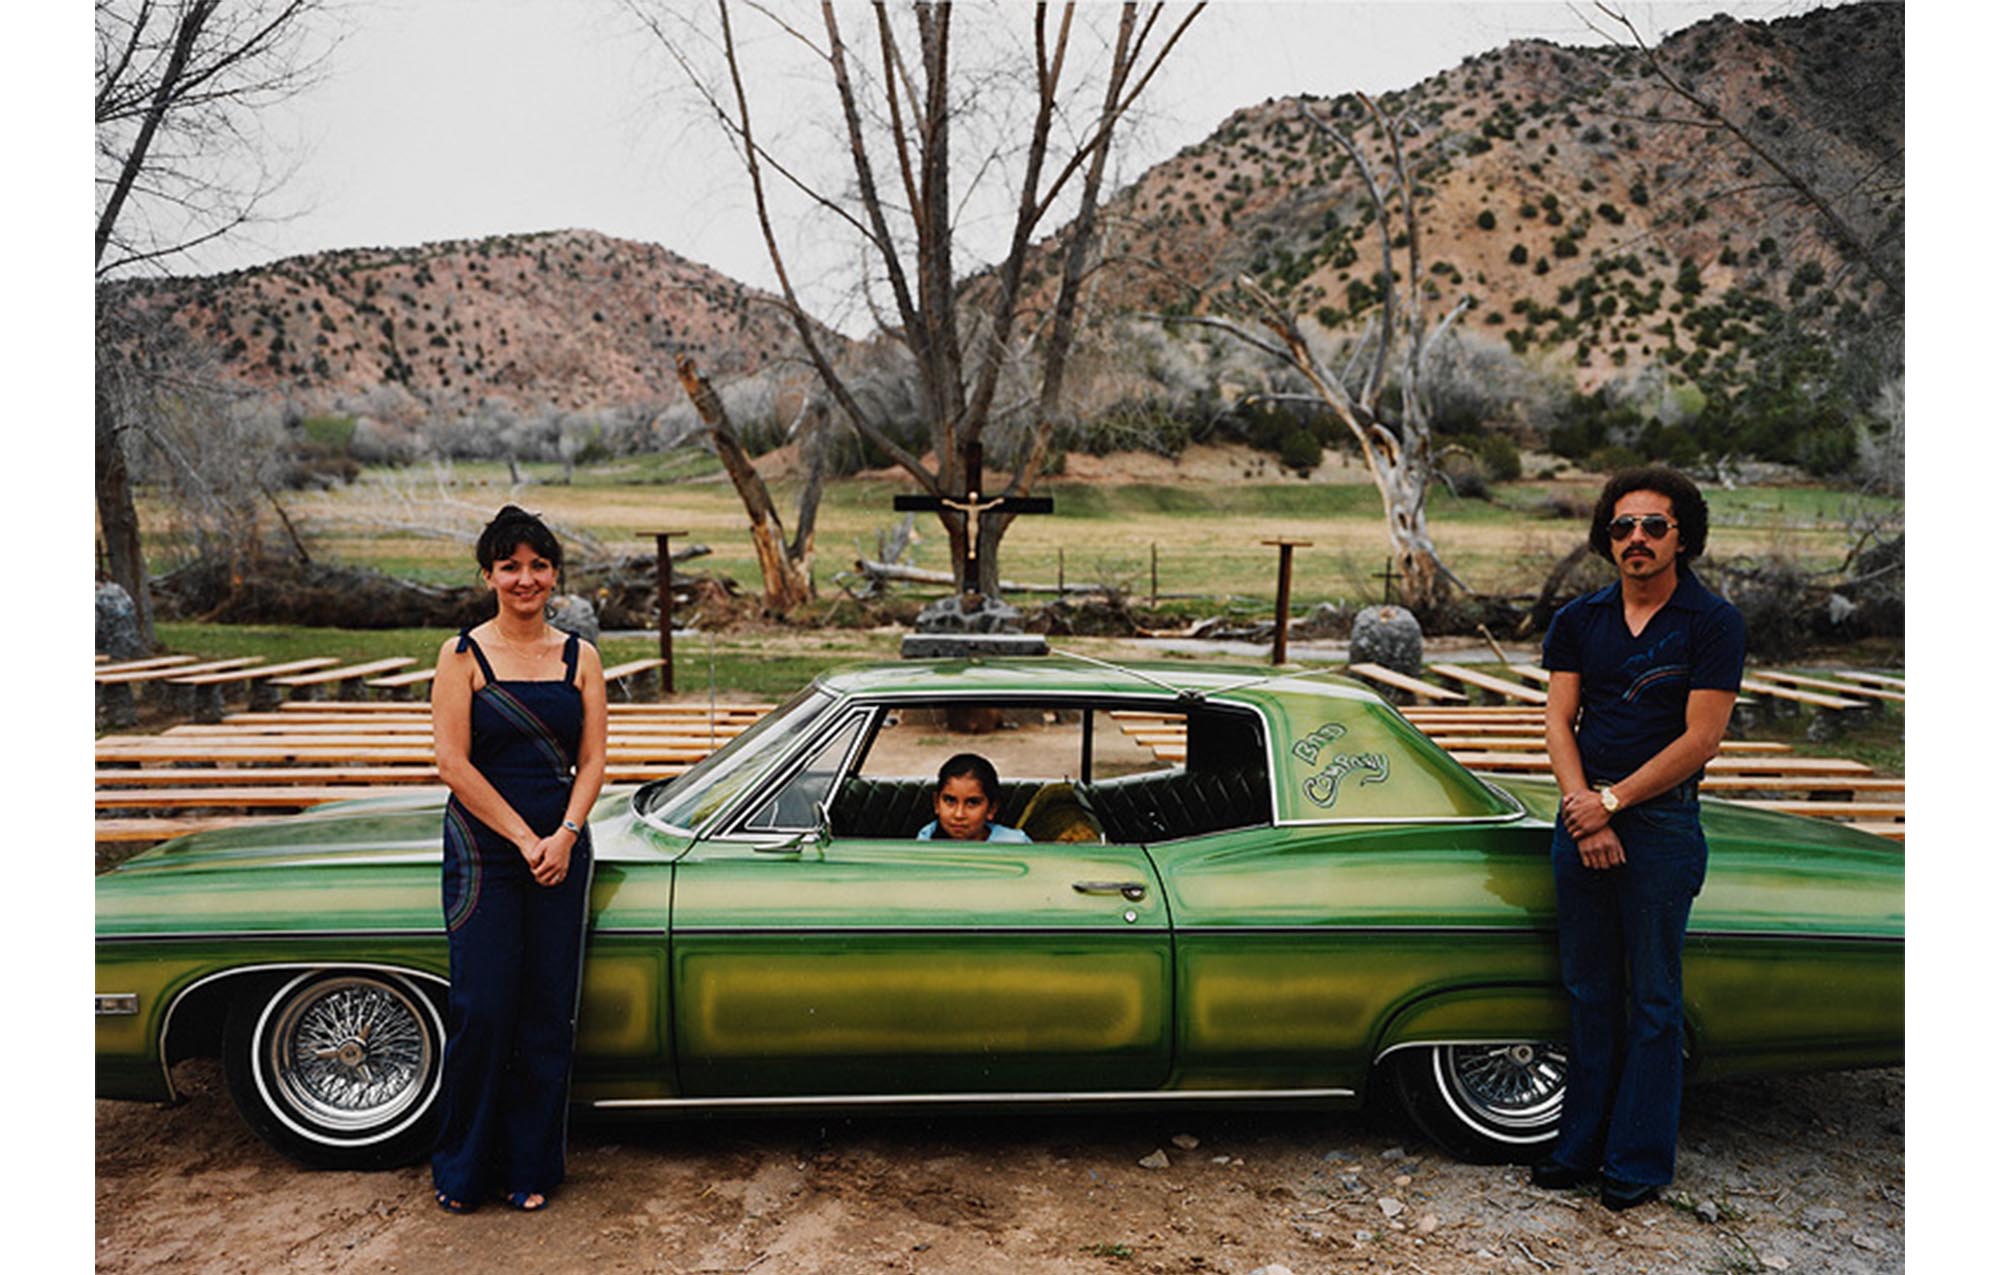 rural roadside, hills in distance with scrub growth, roadside shrine with crucifix in center and benches placed around it, in foreground a green sedan with lighter green painted panels, small child seated in driver's seat, young woman to left standing near hood in blue denim slacks and top, young man with mustache in same patterned denim outfit standing near trunk